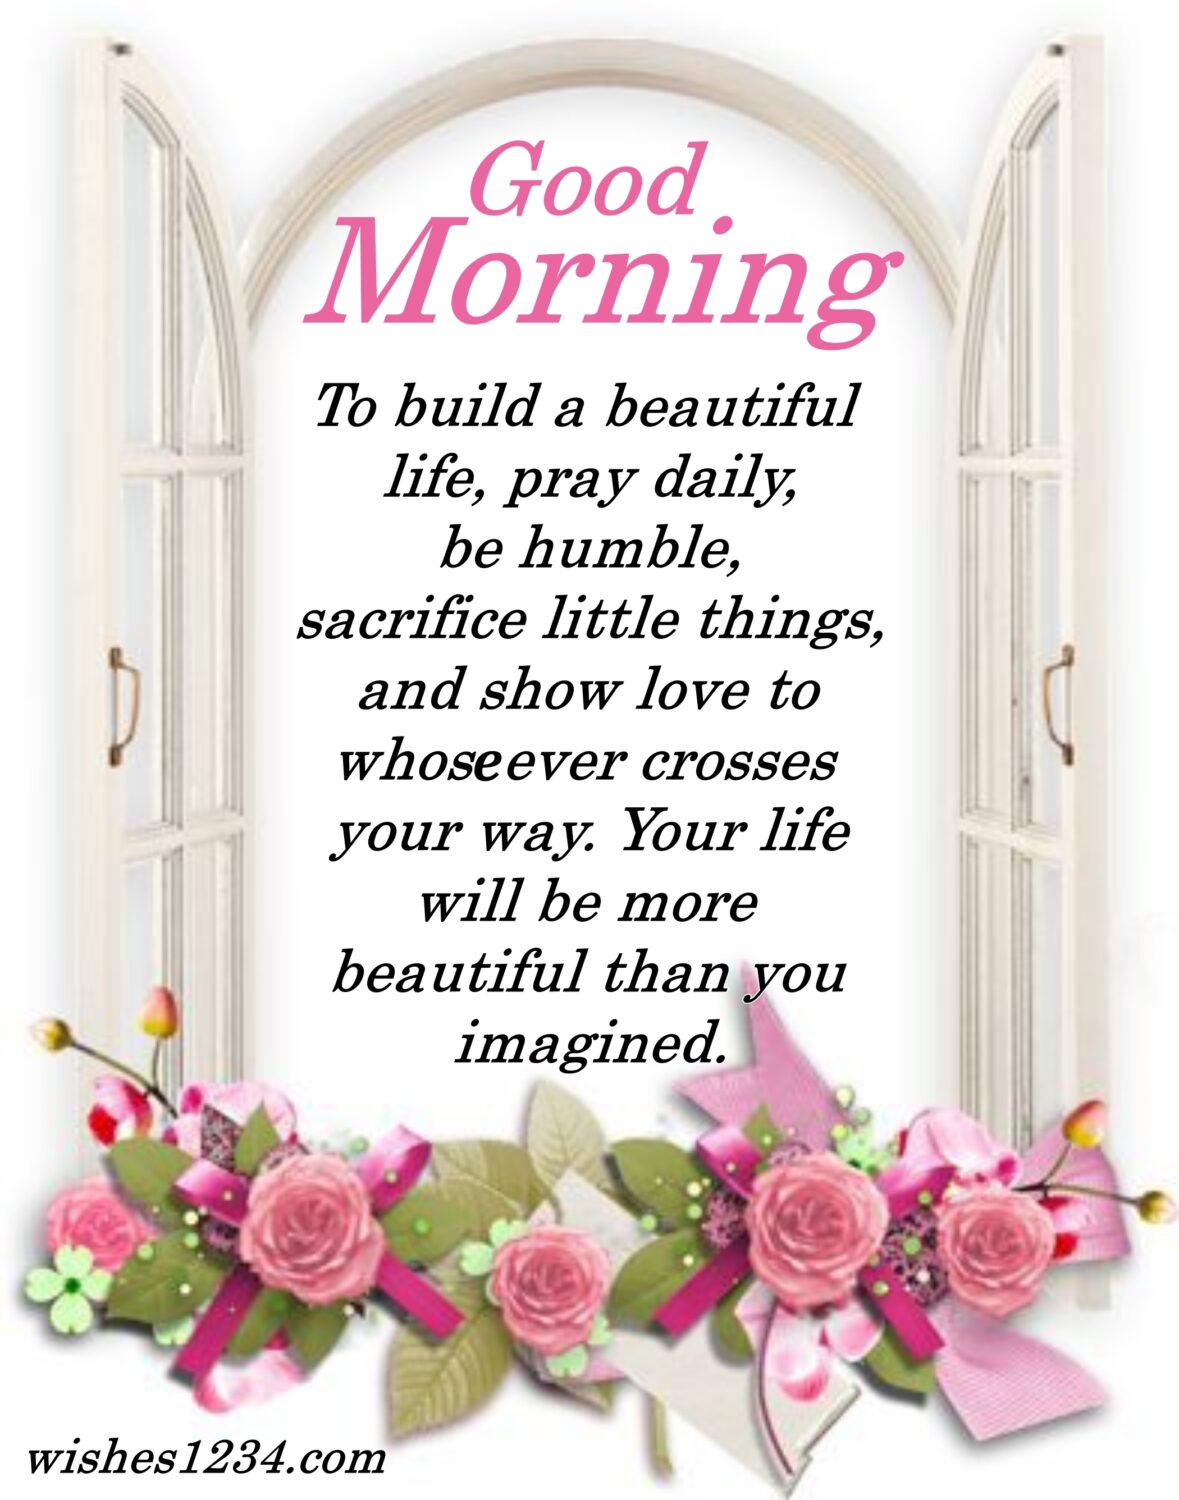 Flowers in open window, Friday Quotes | Good Morning Friday | Happy Friday | Blessed Friday Quotes.